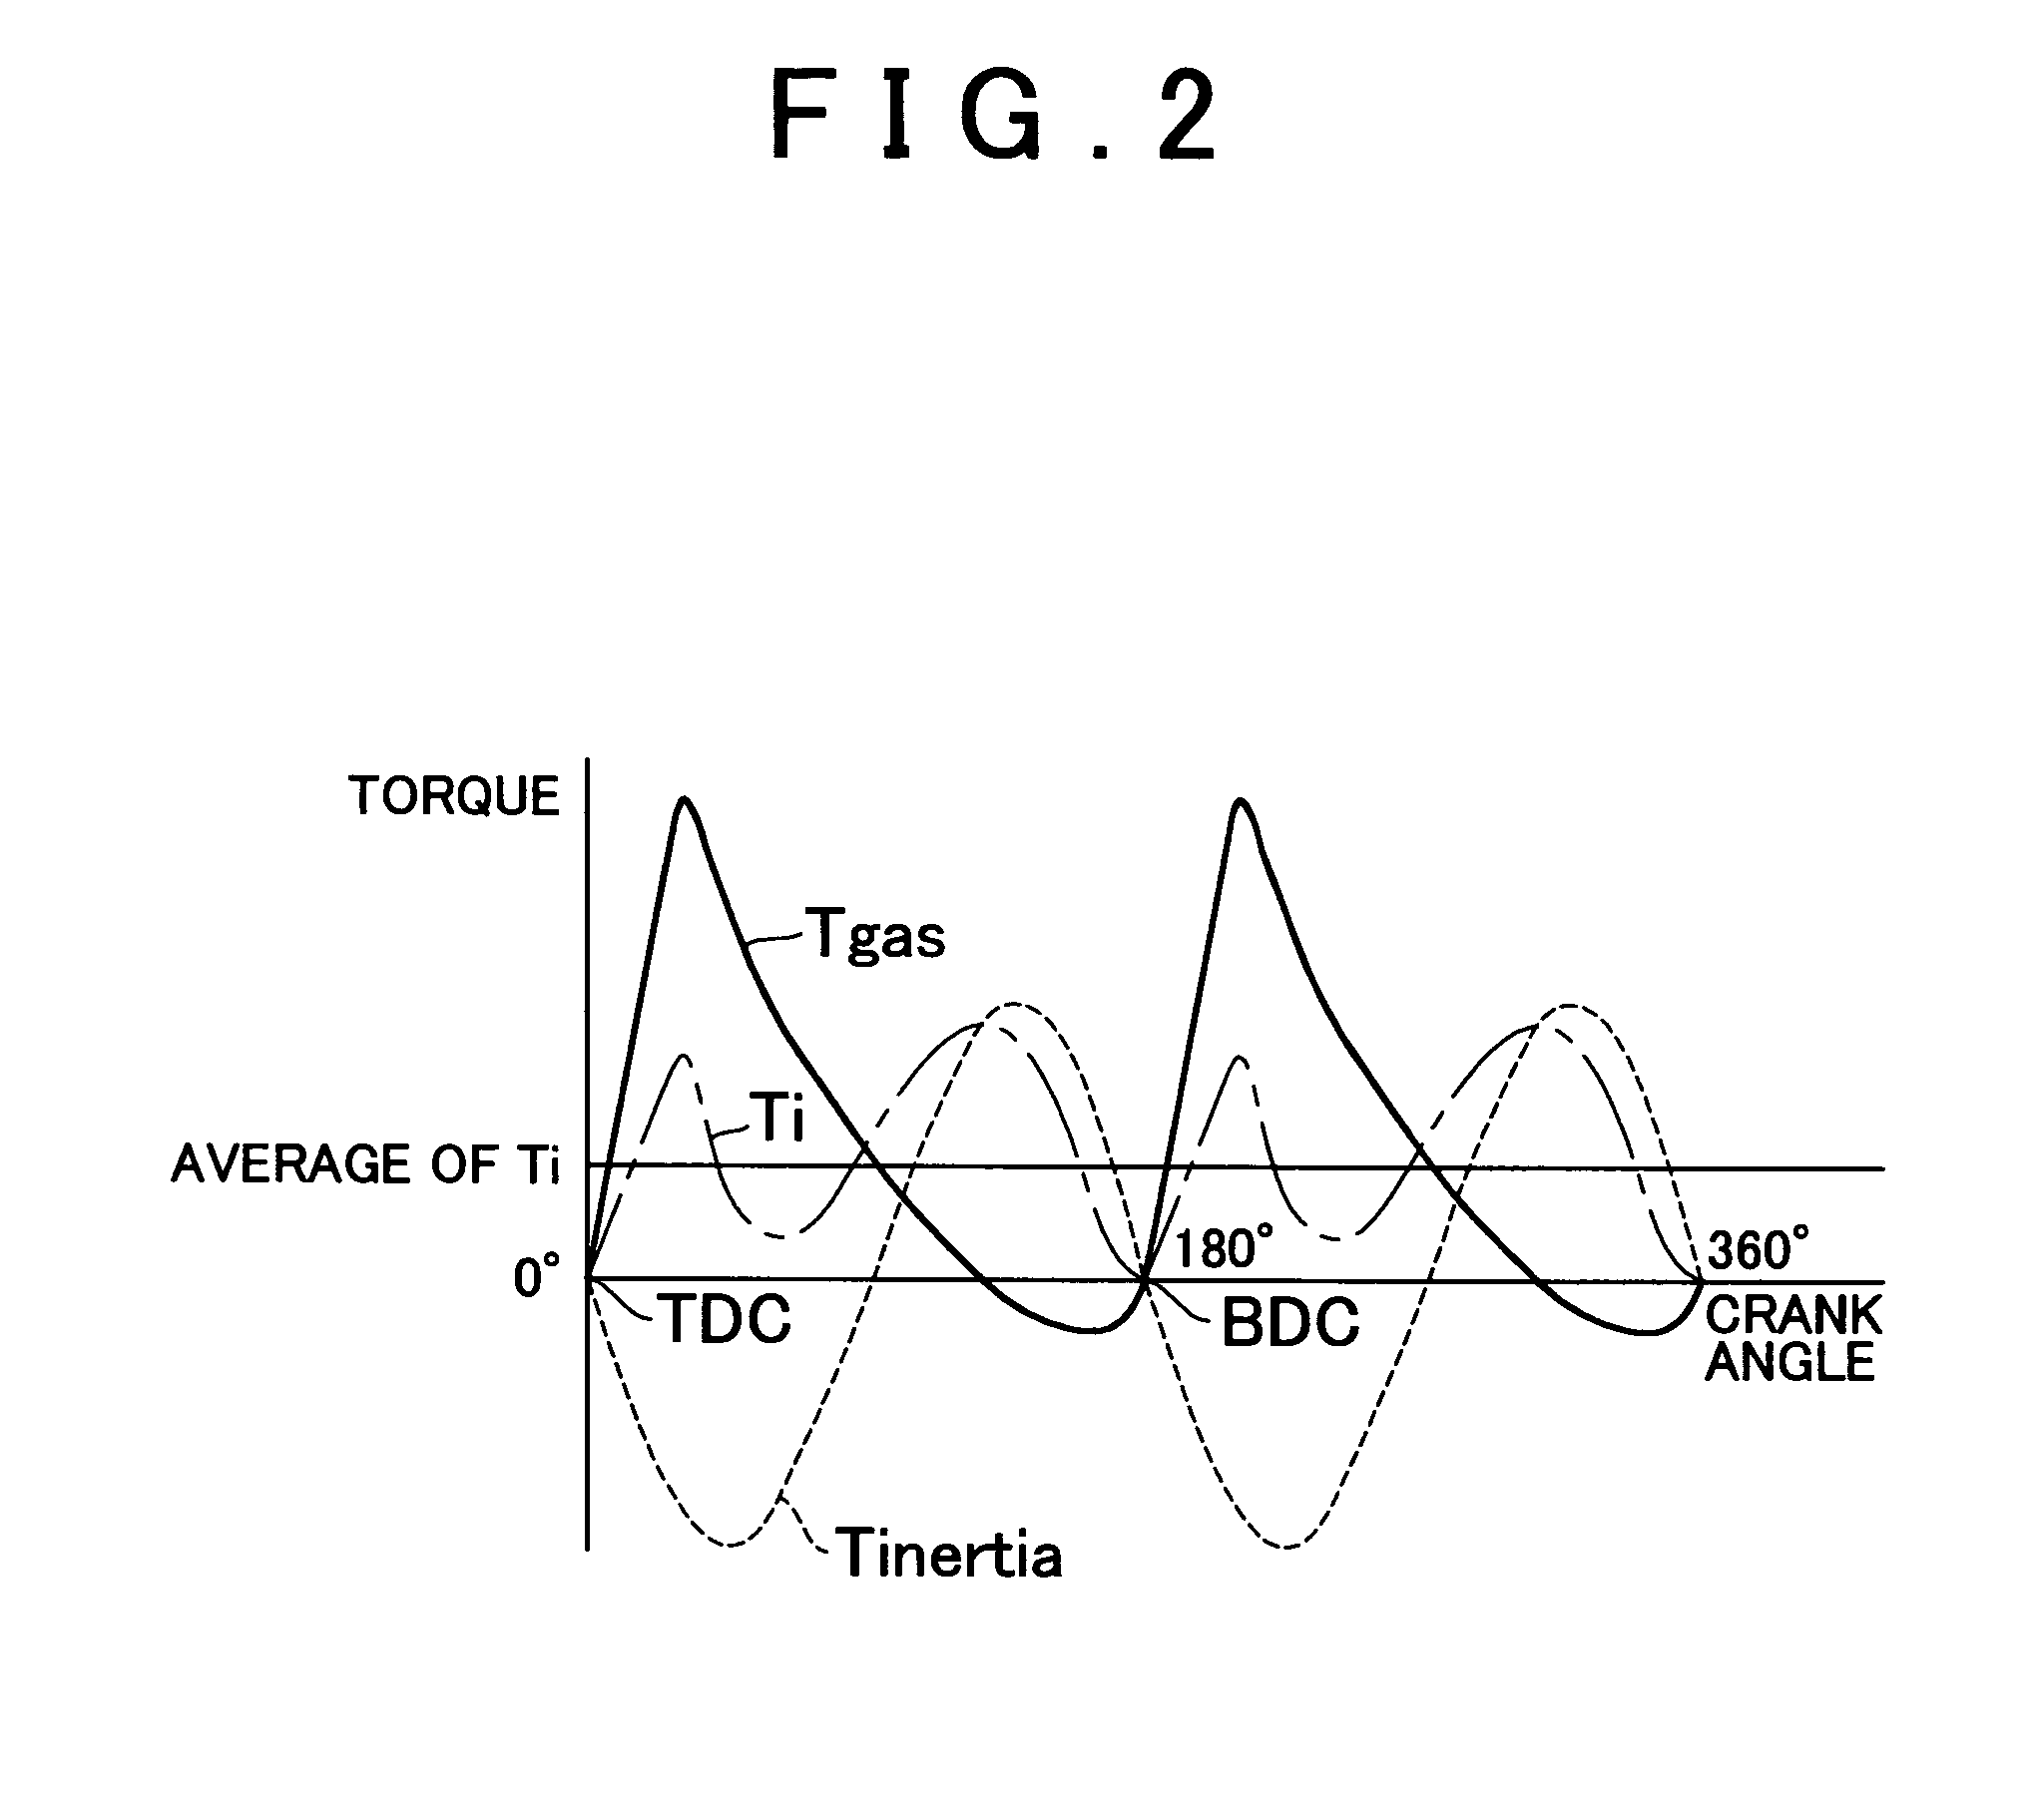 Combustion state estimating apparatus for internal combustion engine